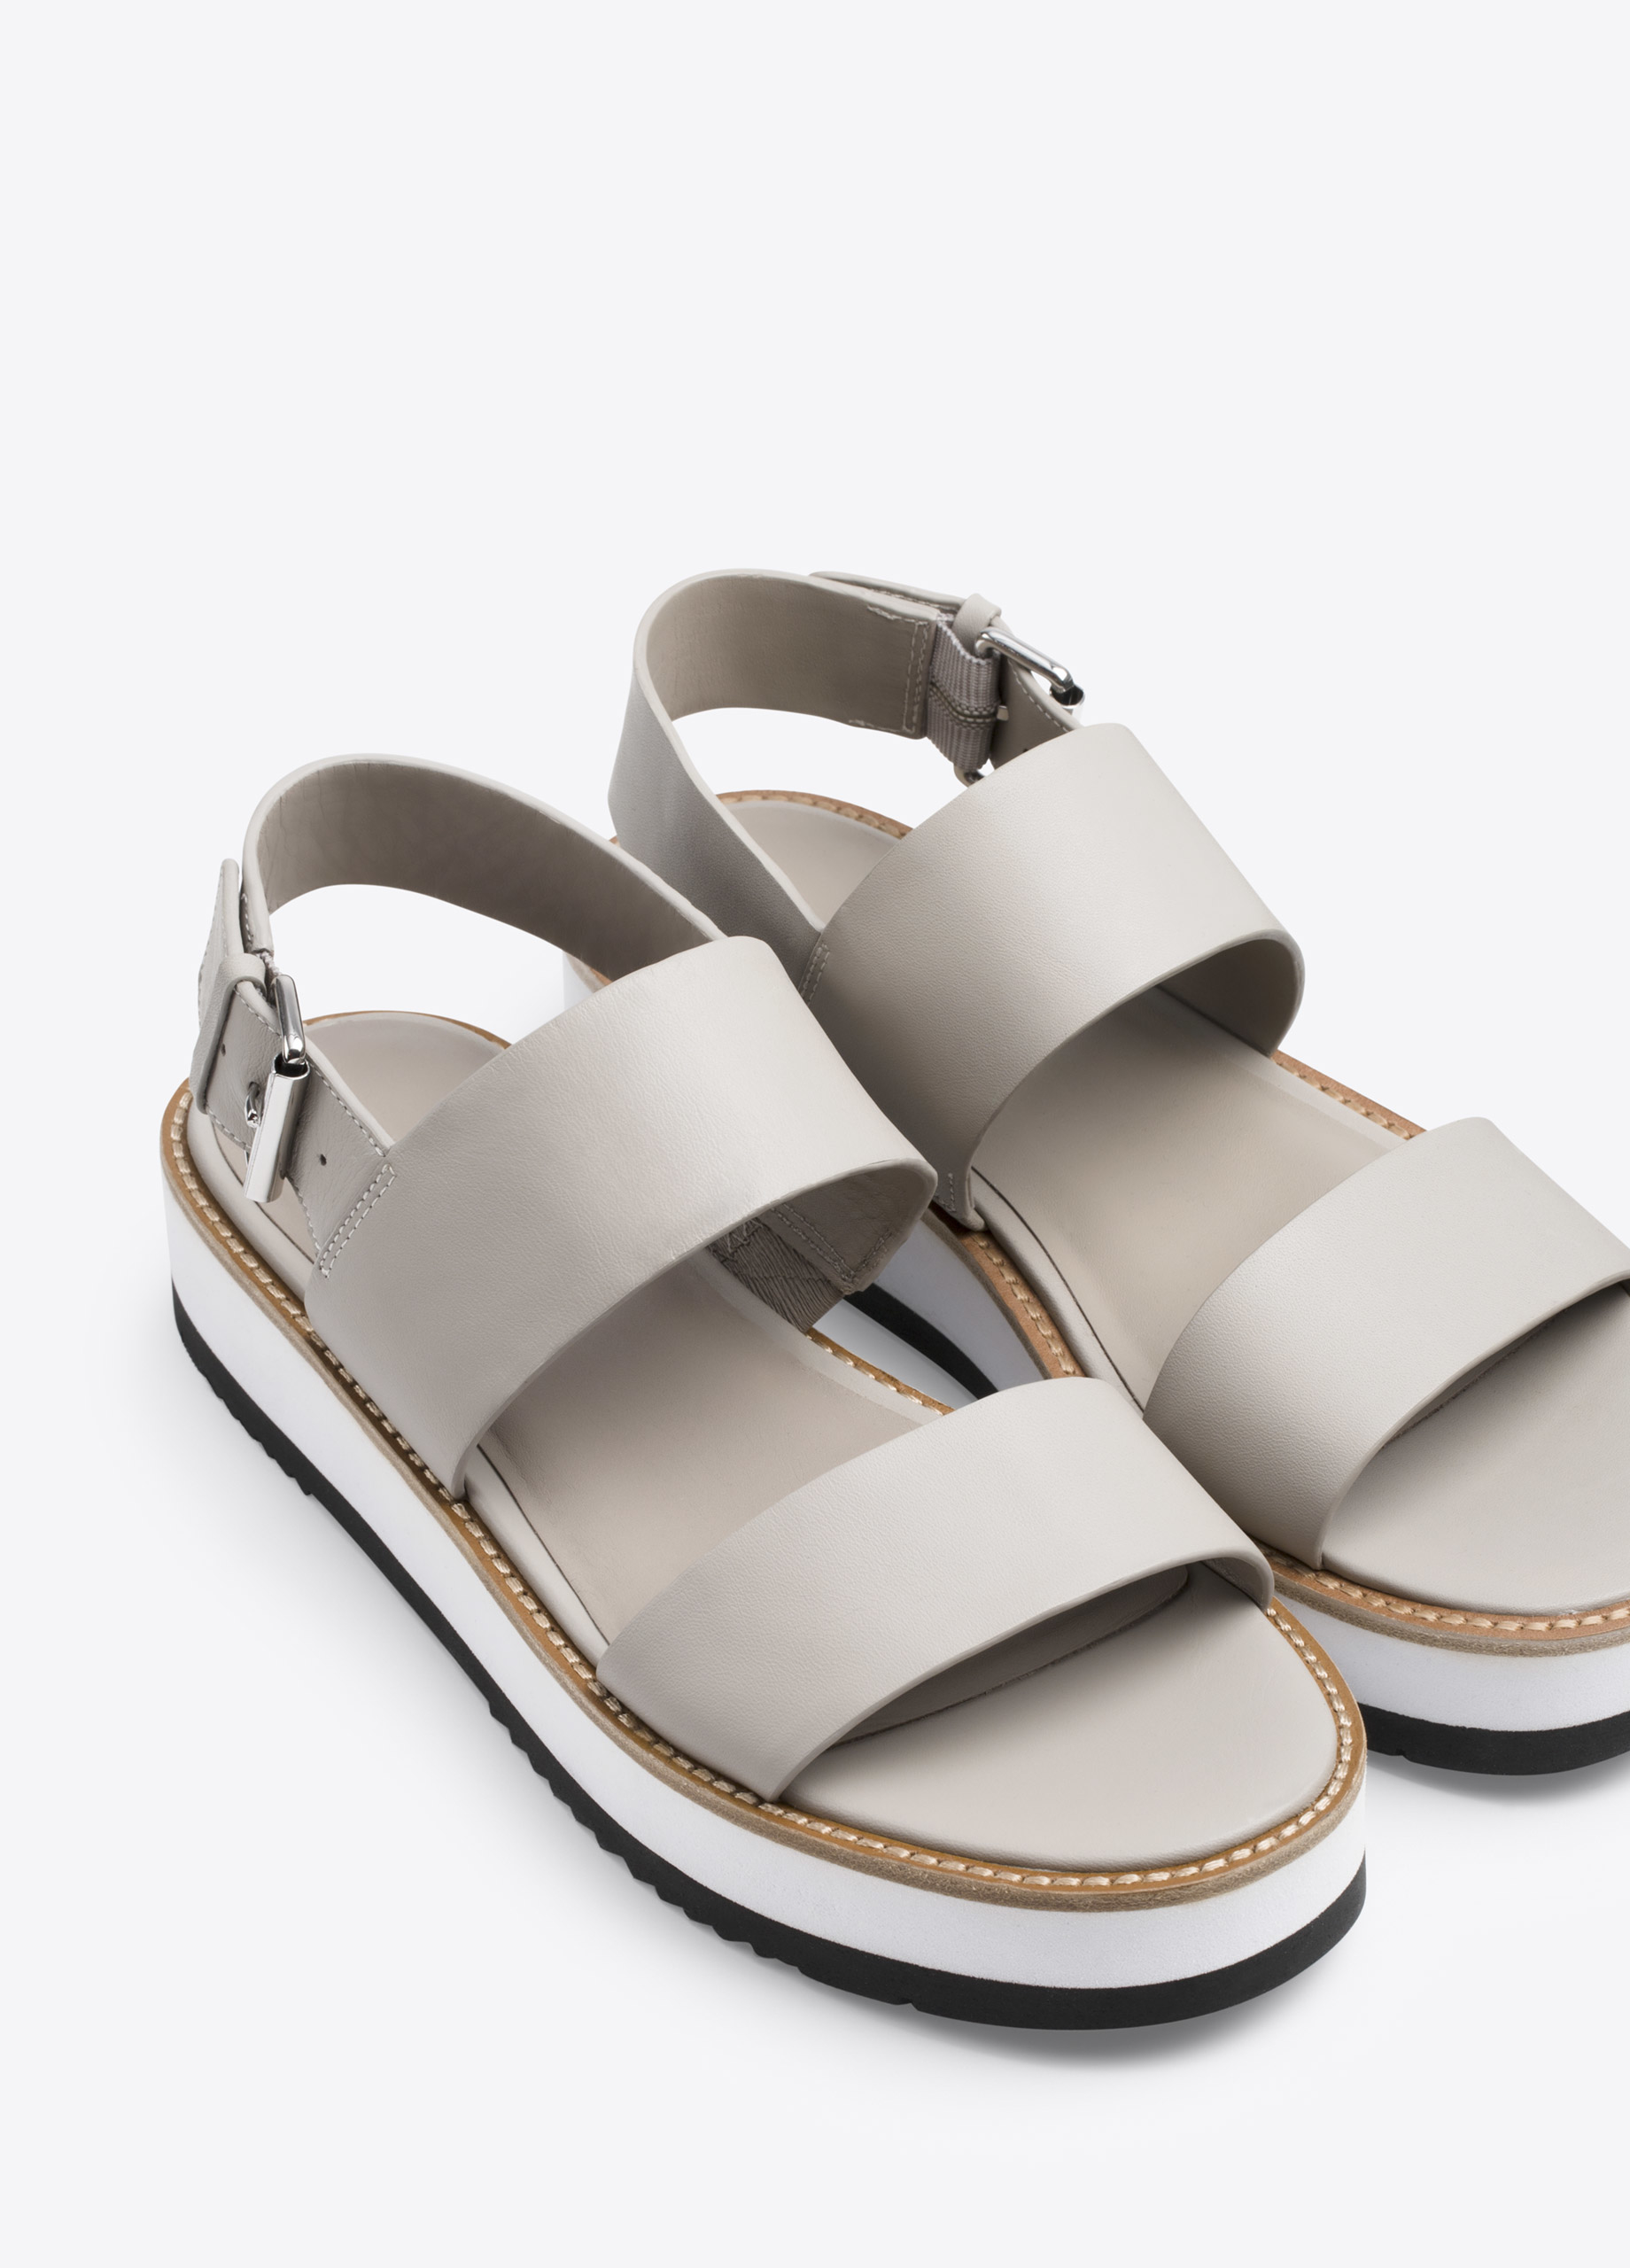 Lyst - Vince Mana Leather Flatform Sandals in Gray